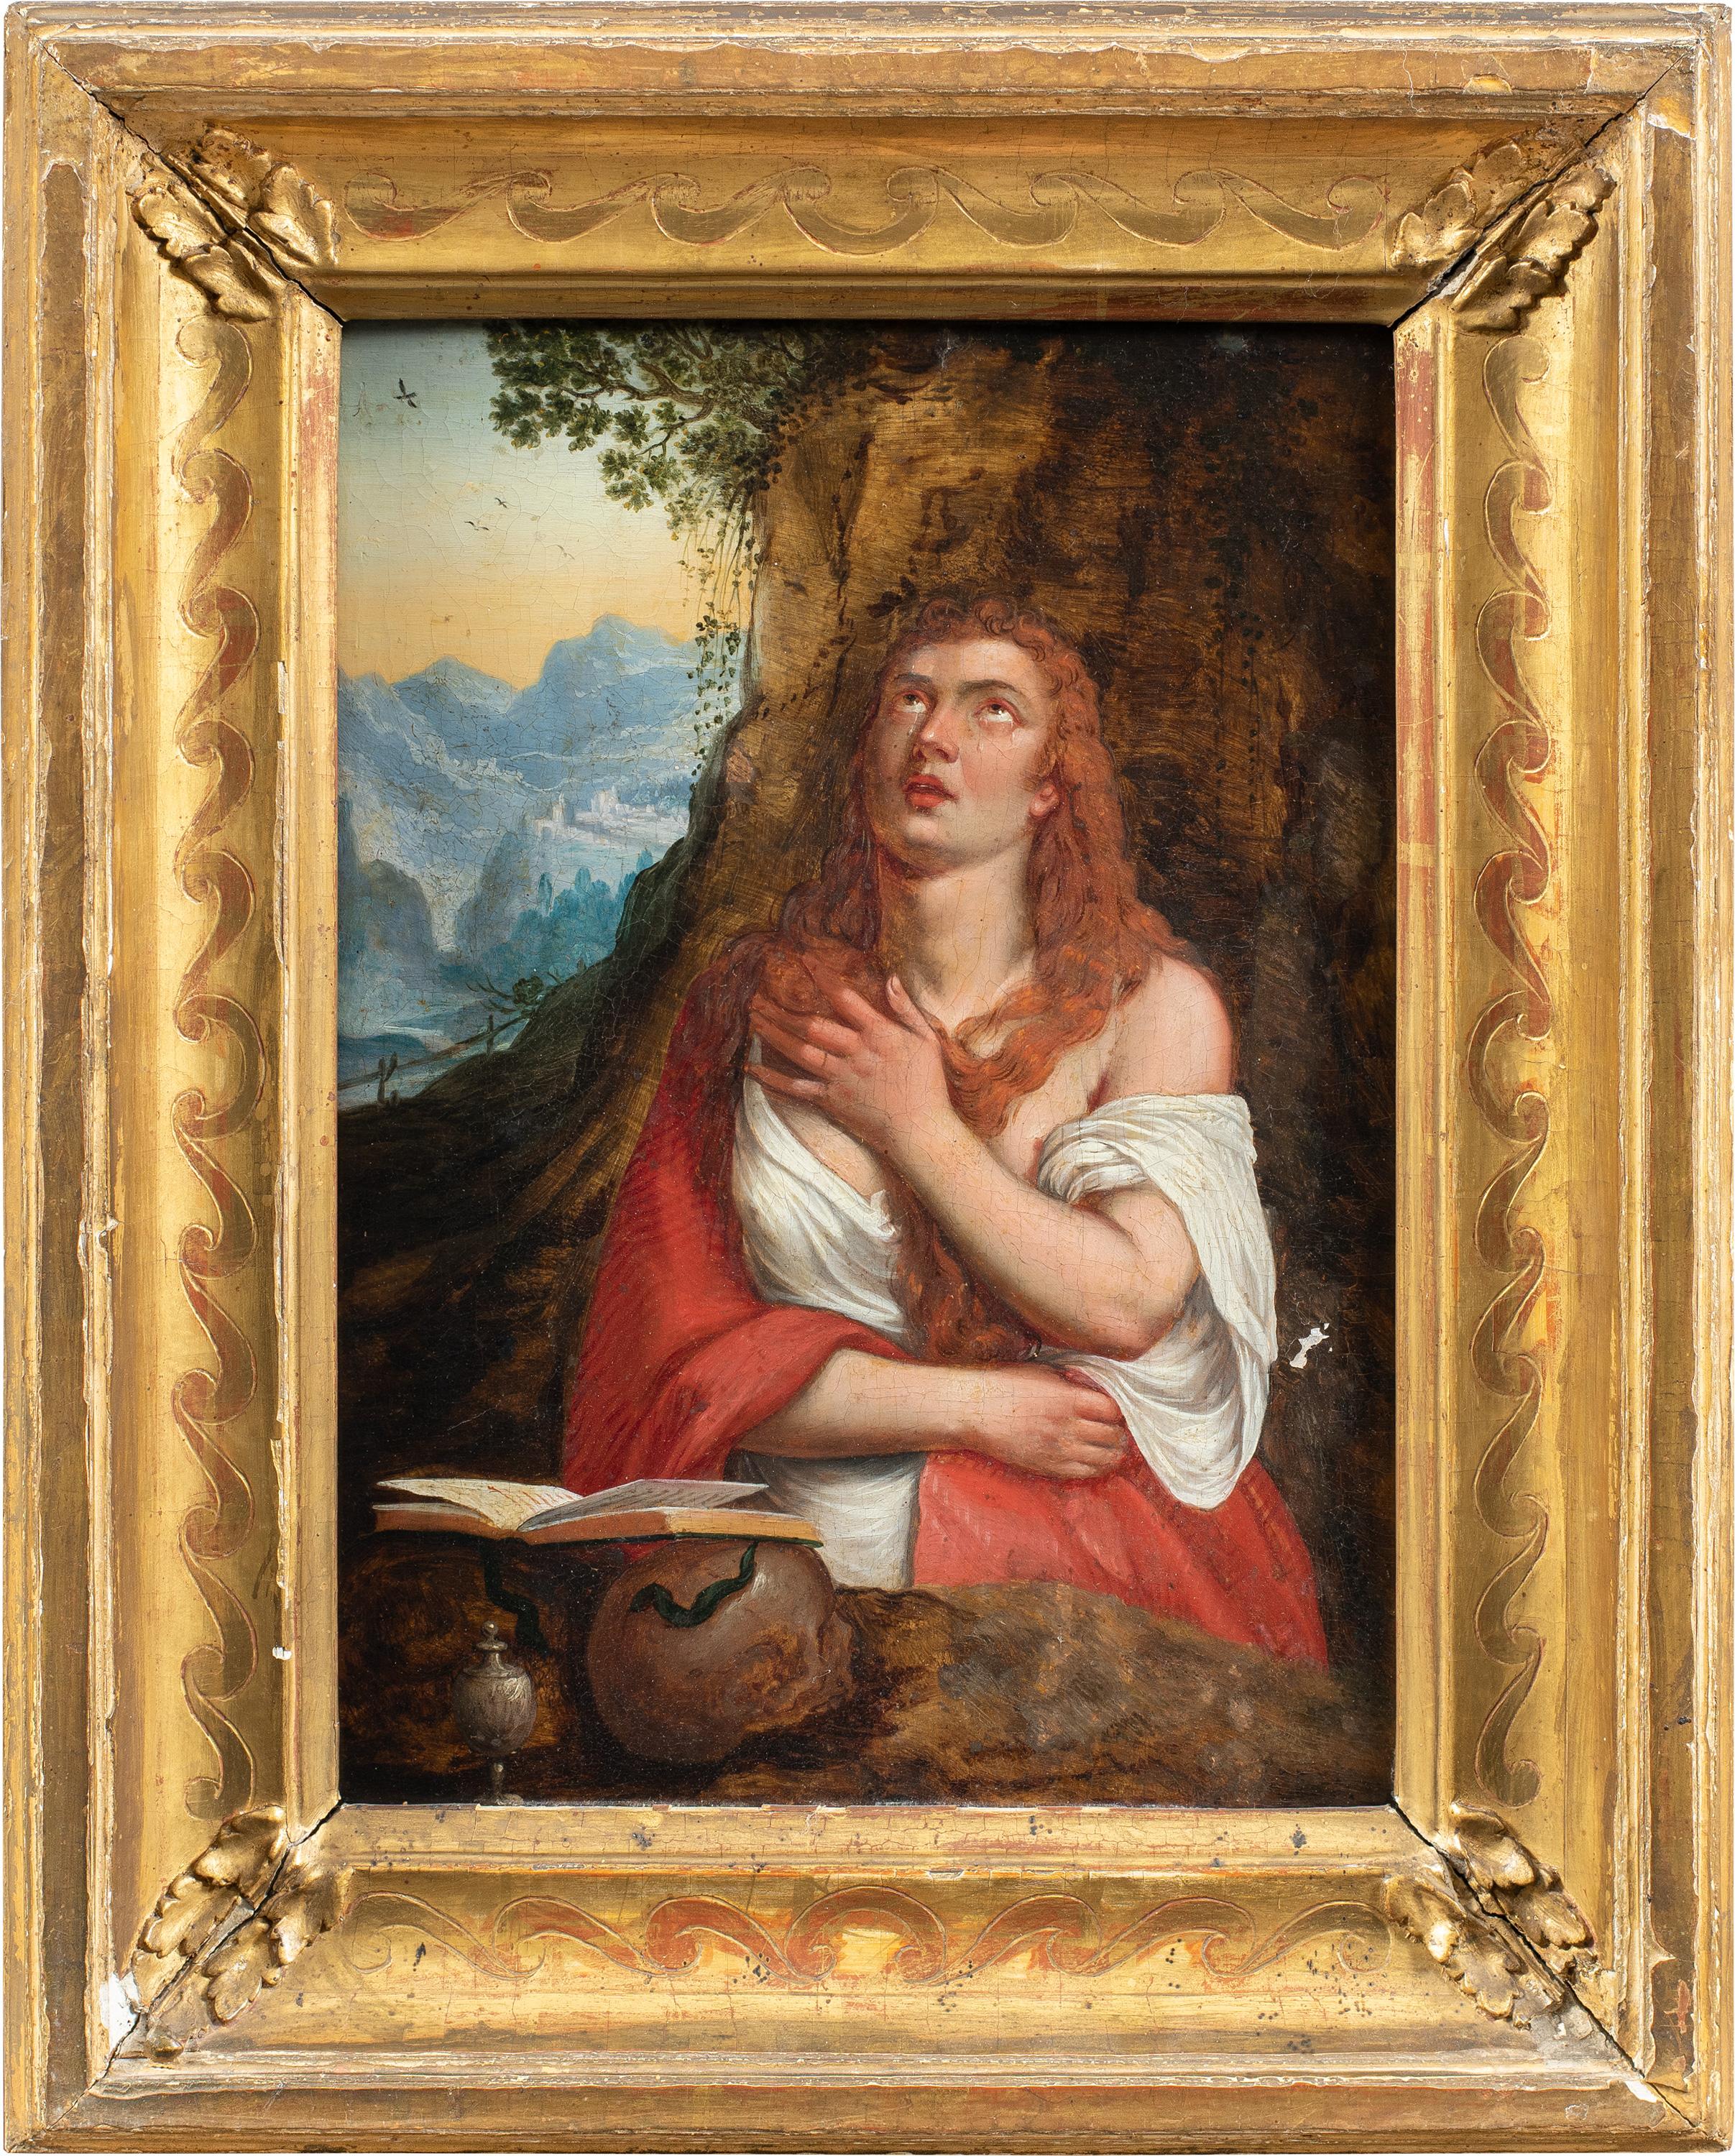 Unknown Landscape Painting - Titian workshop(Venetian school) - 17th century figure painting - Mary Magdalene